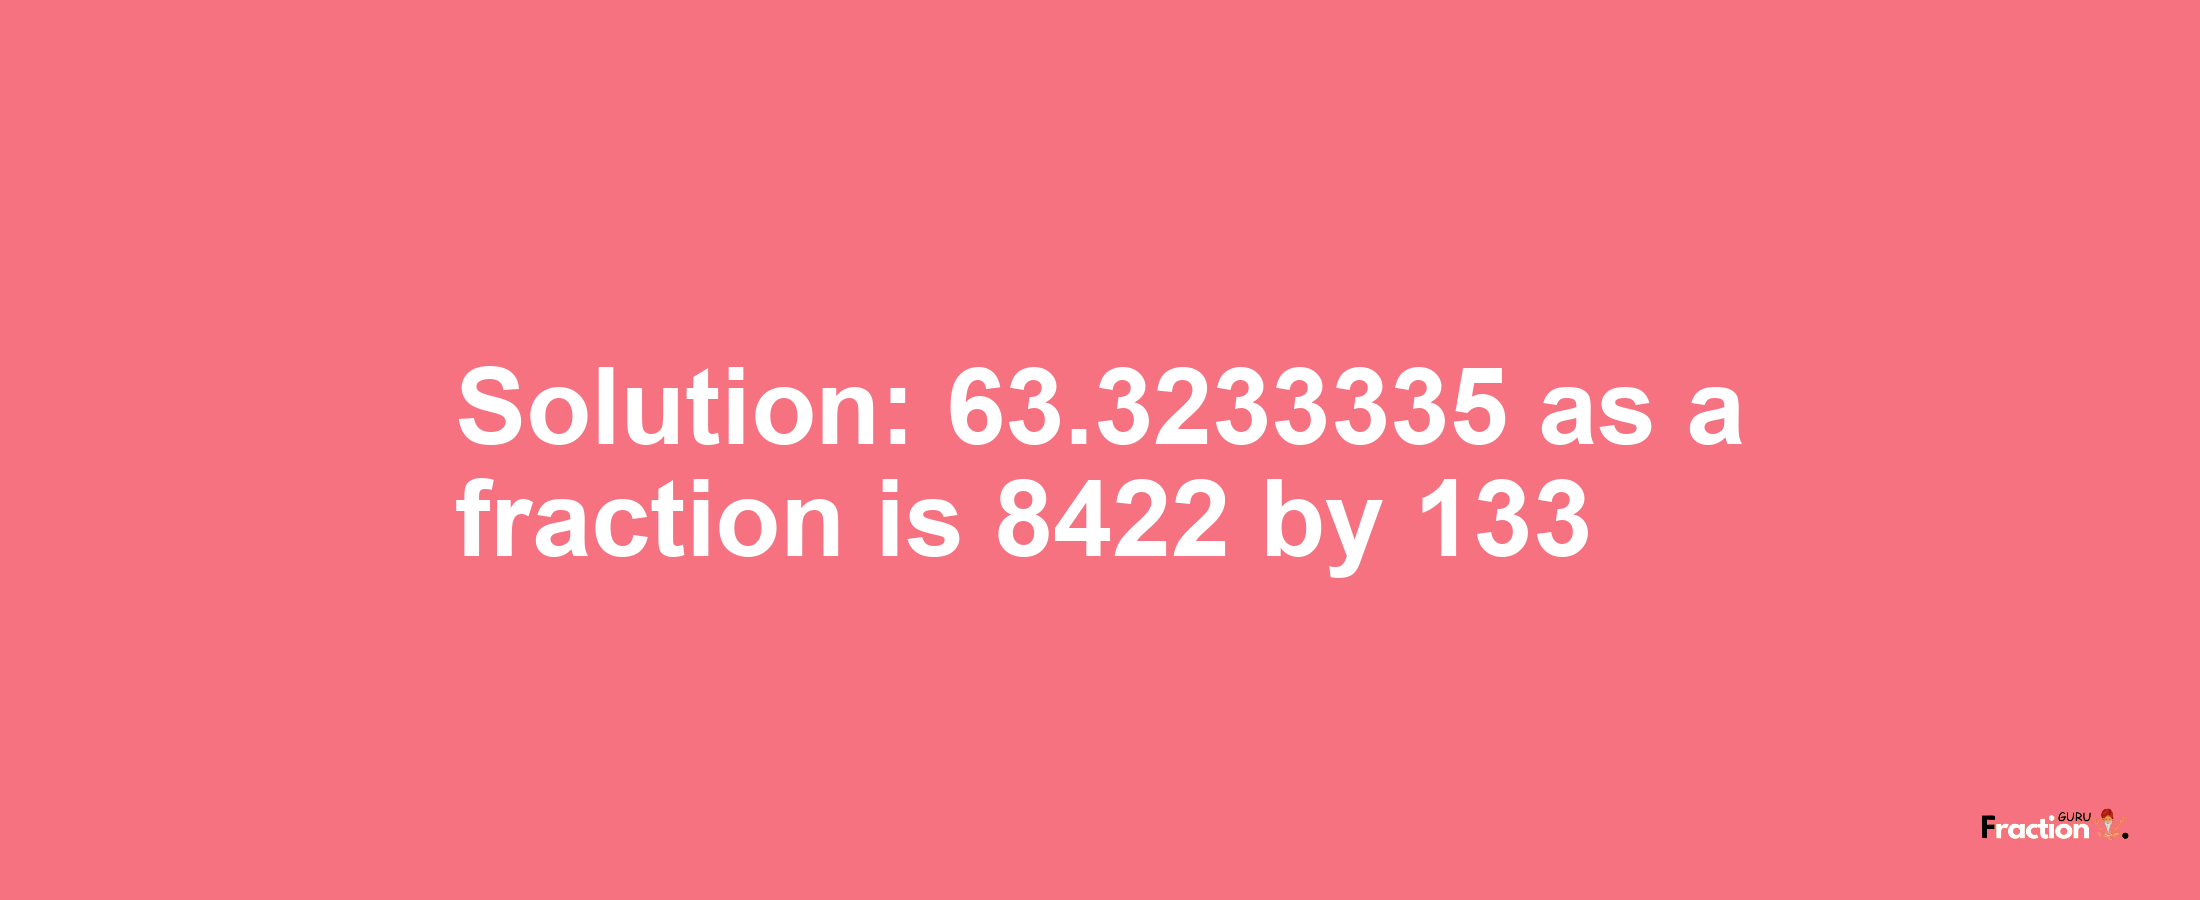 Solution:63.3233335 as a fraction is 8422/133